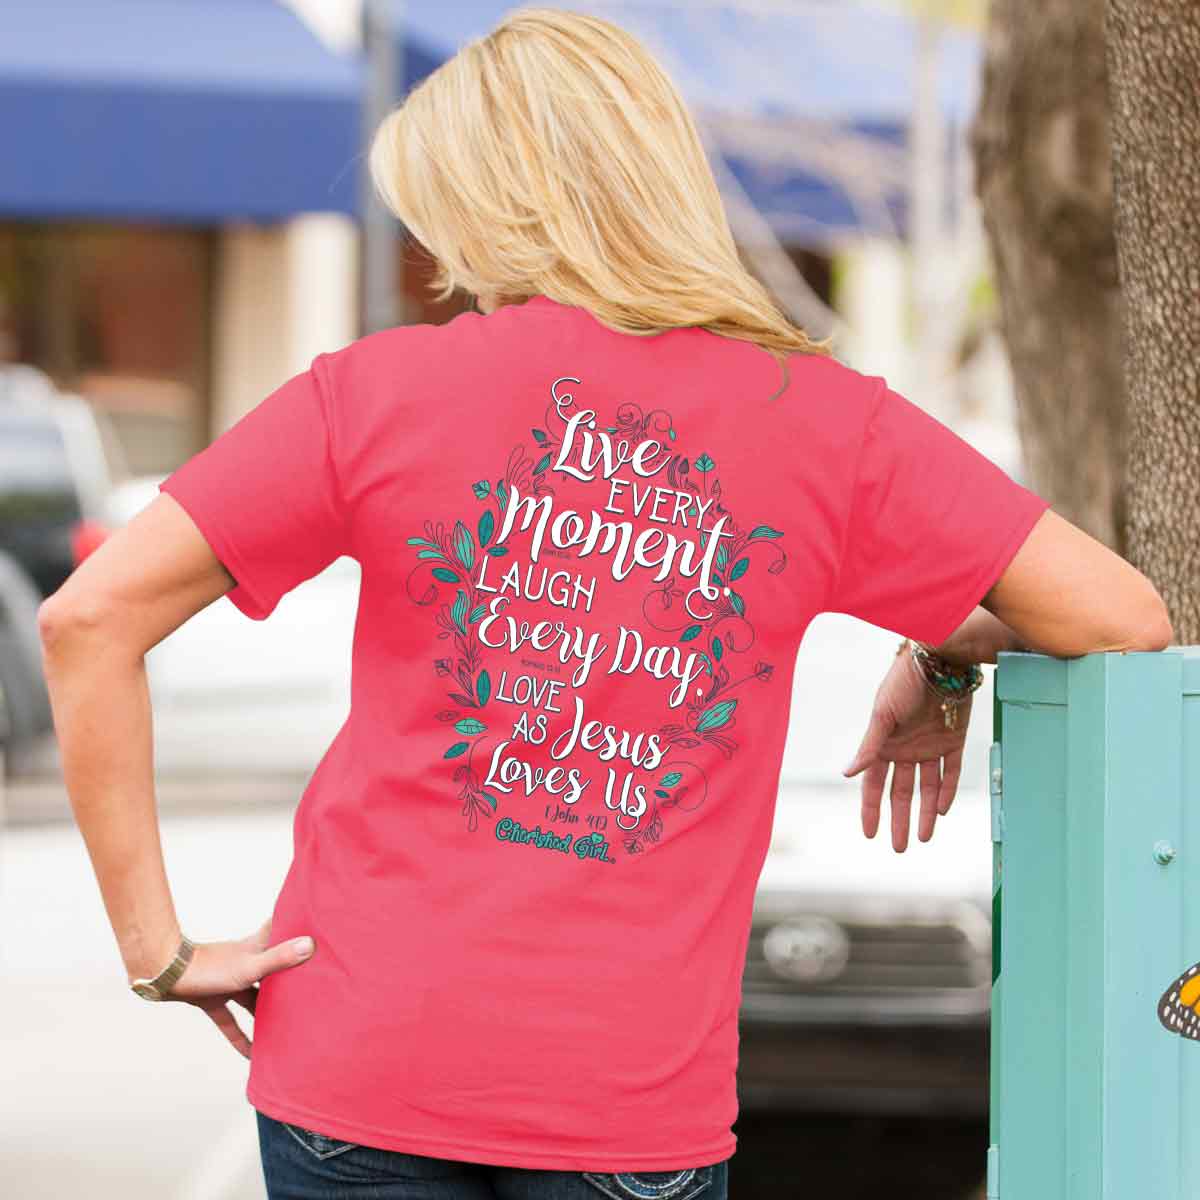 Cherished Girl Womens T-Shirt Live Every Day - Kerusso Wholesale